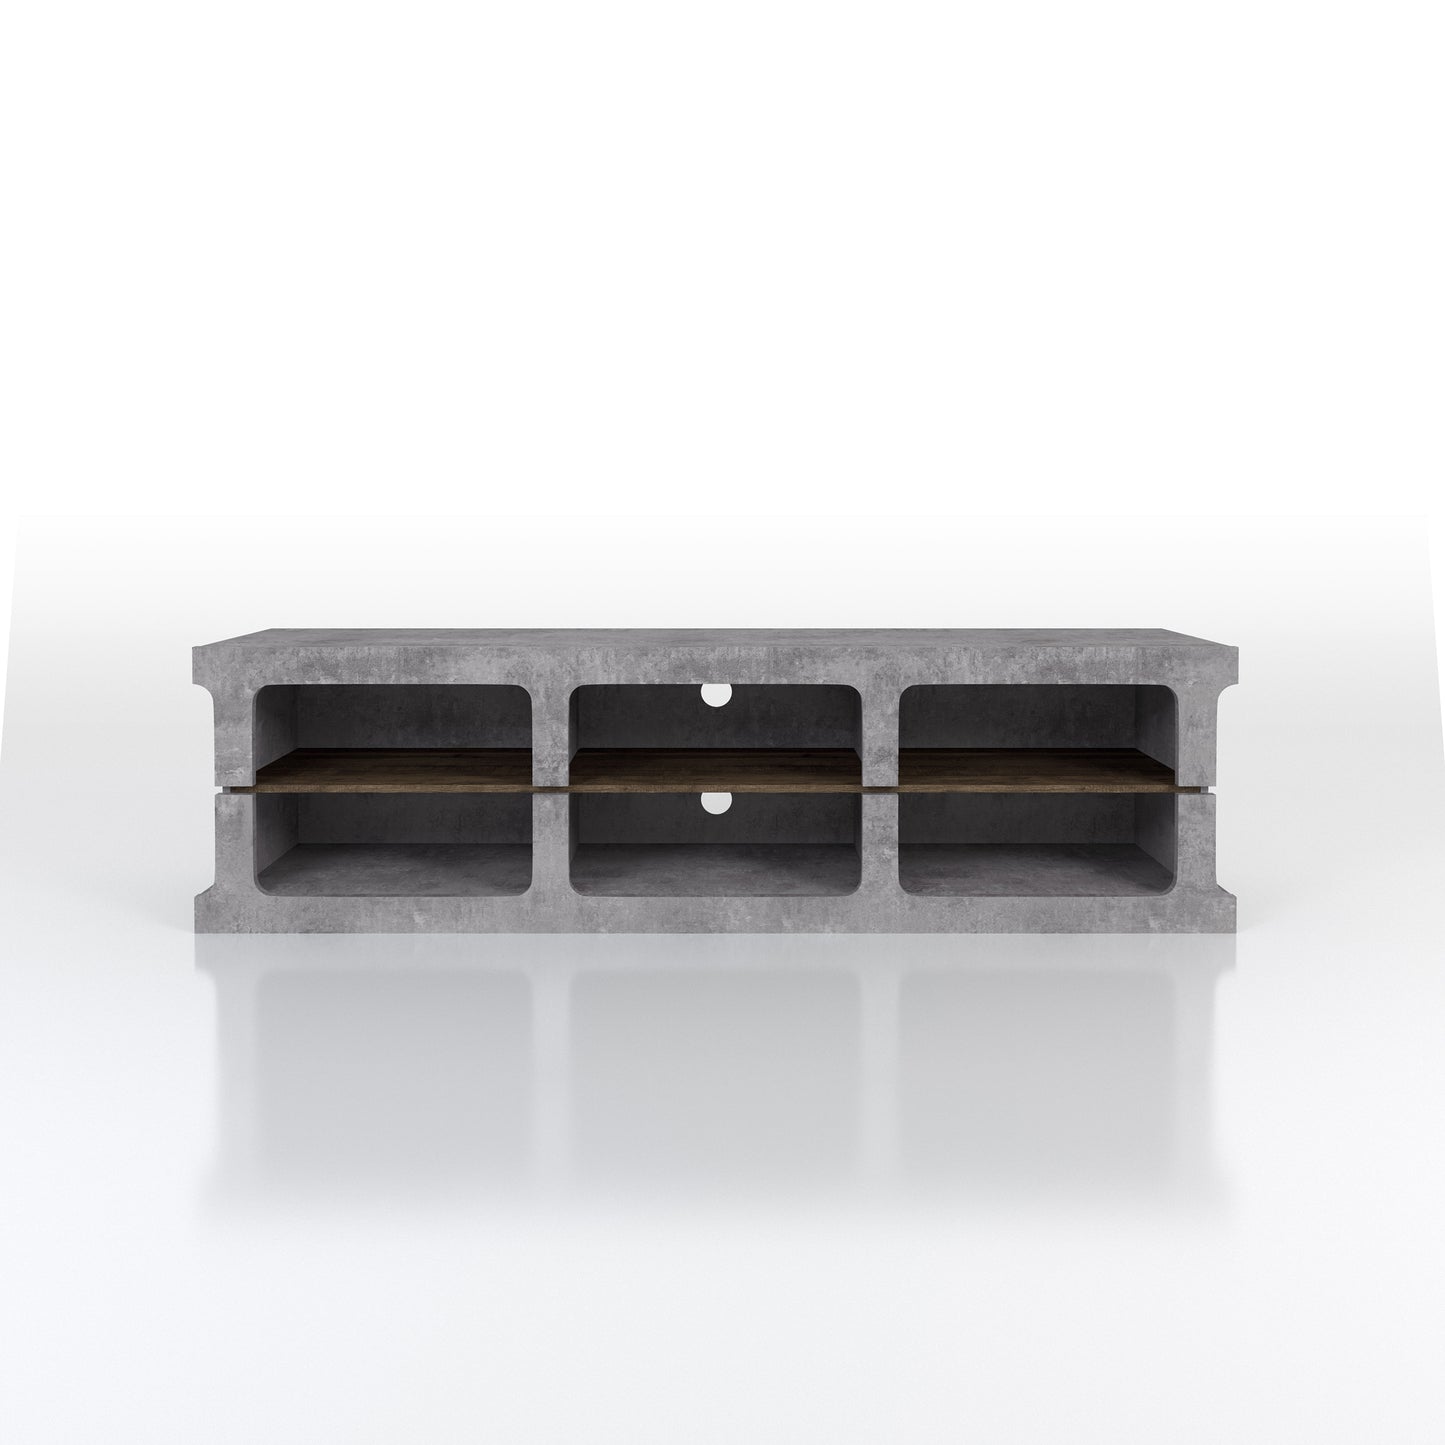 Front-facing industrial cement and wood six-shelf TV stand on a white background